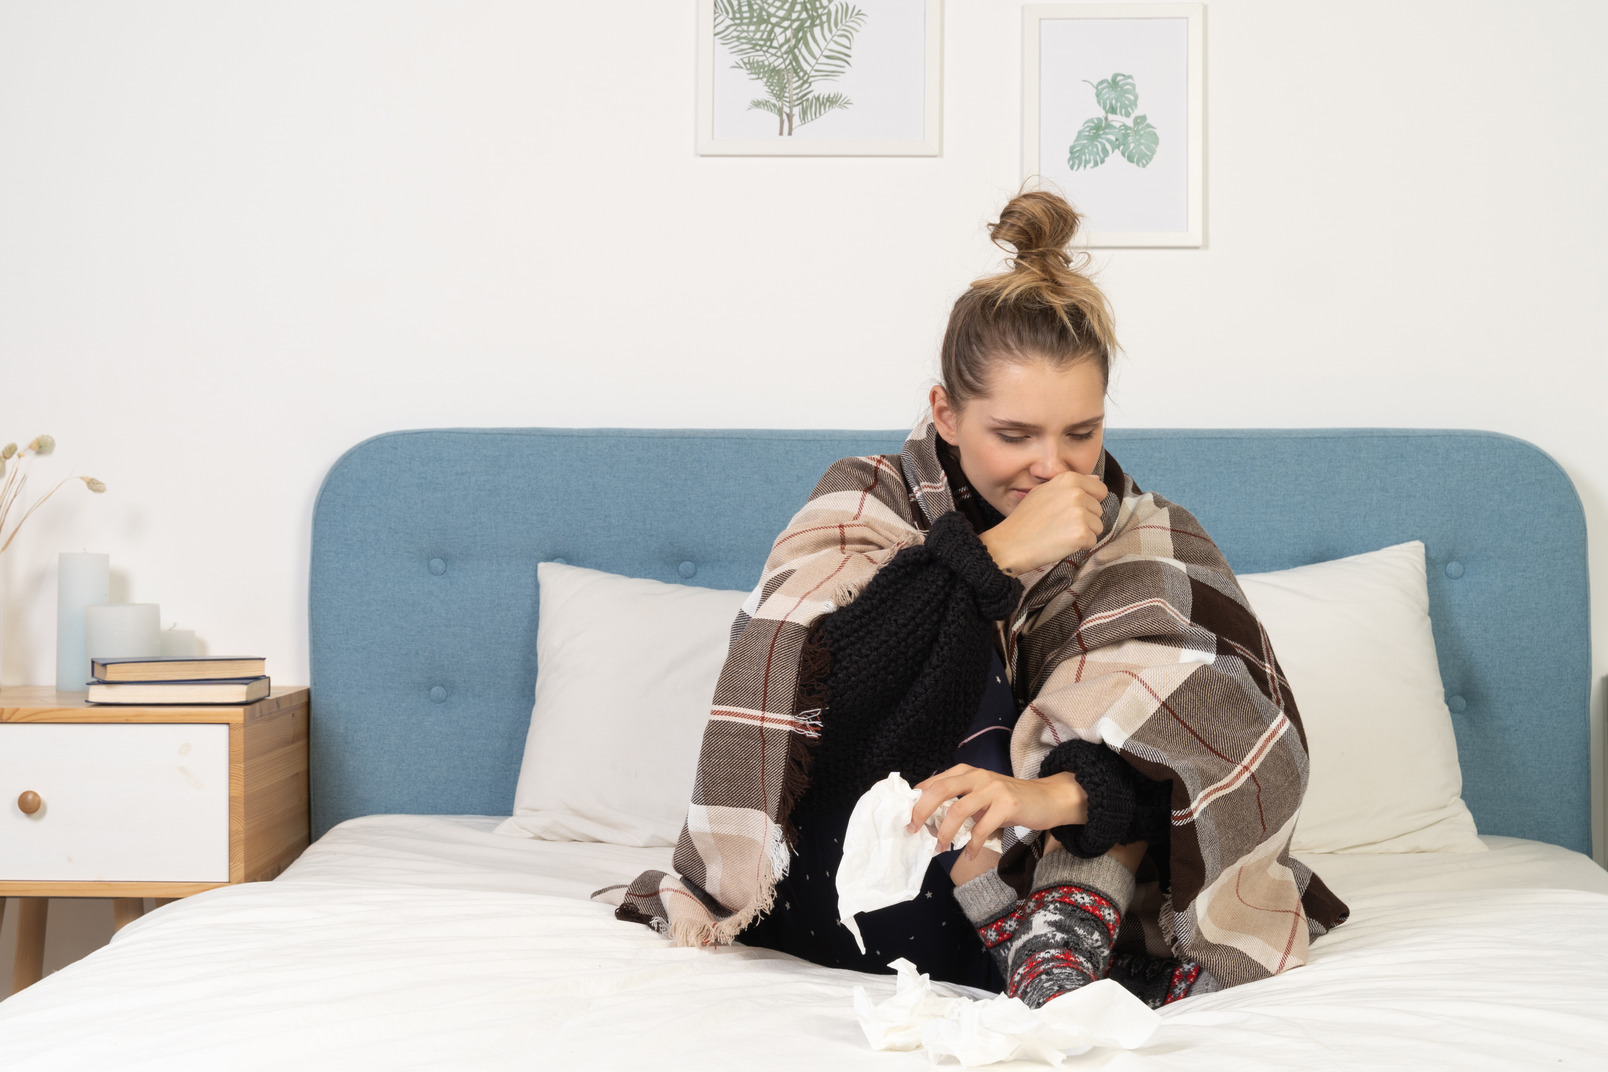 Front view of an ill coughing young lady in pajamas wrapped in checked blanket